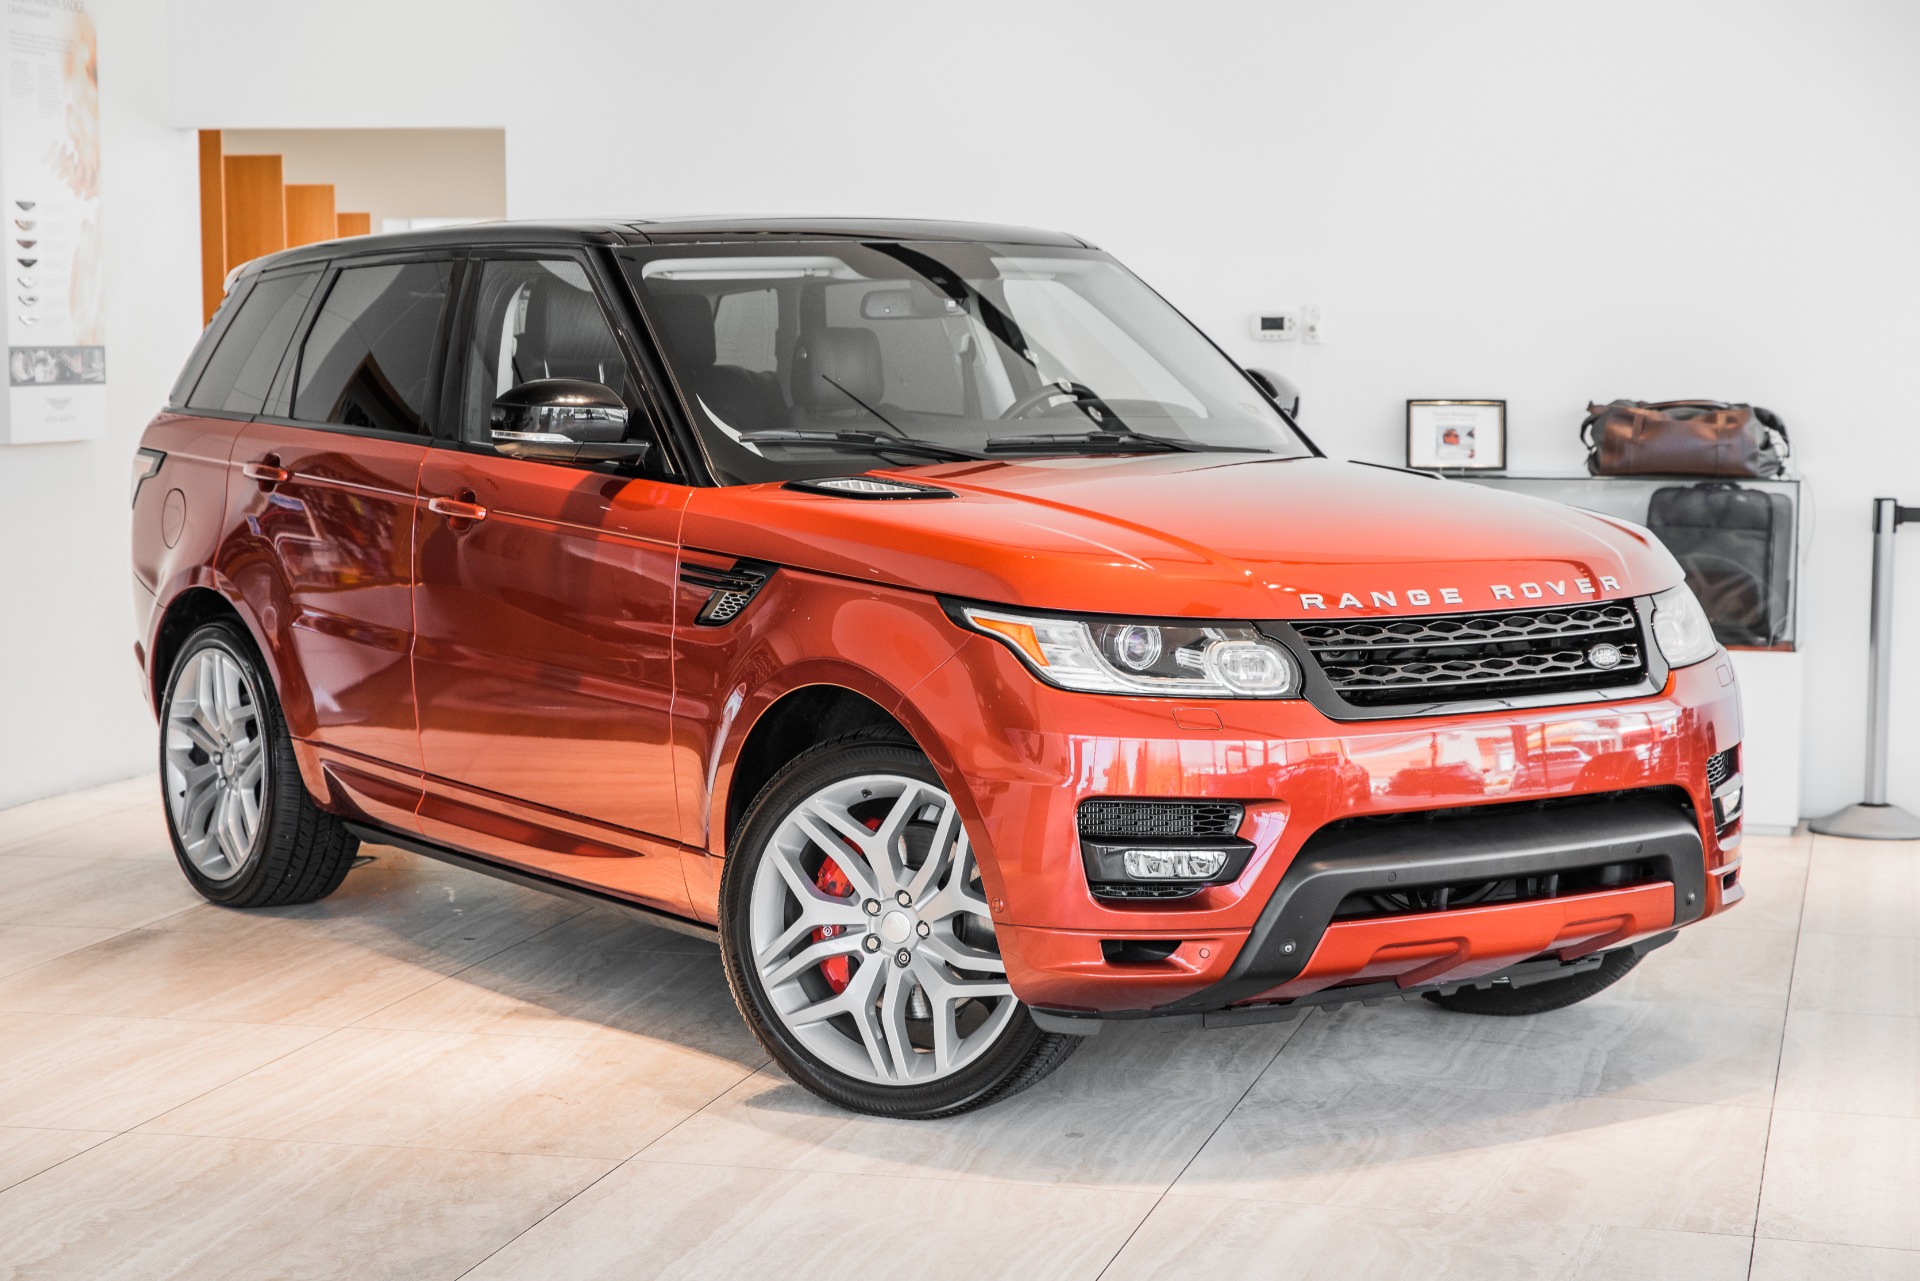 Used 2014 Land Rover Range Rover Sport Autobiography For Sale (Sold) |  Bentley Washington DC Stock #P018103C